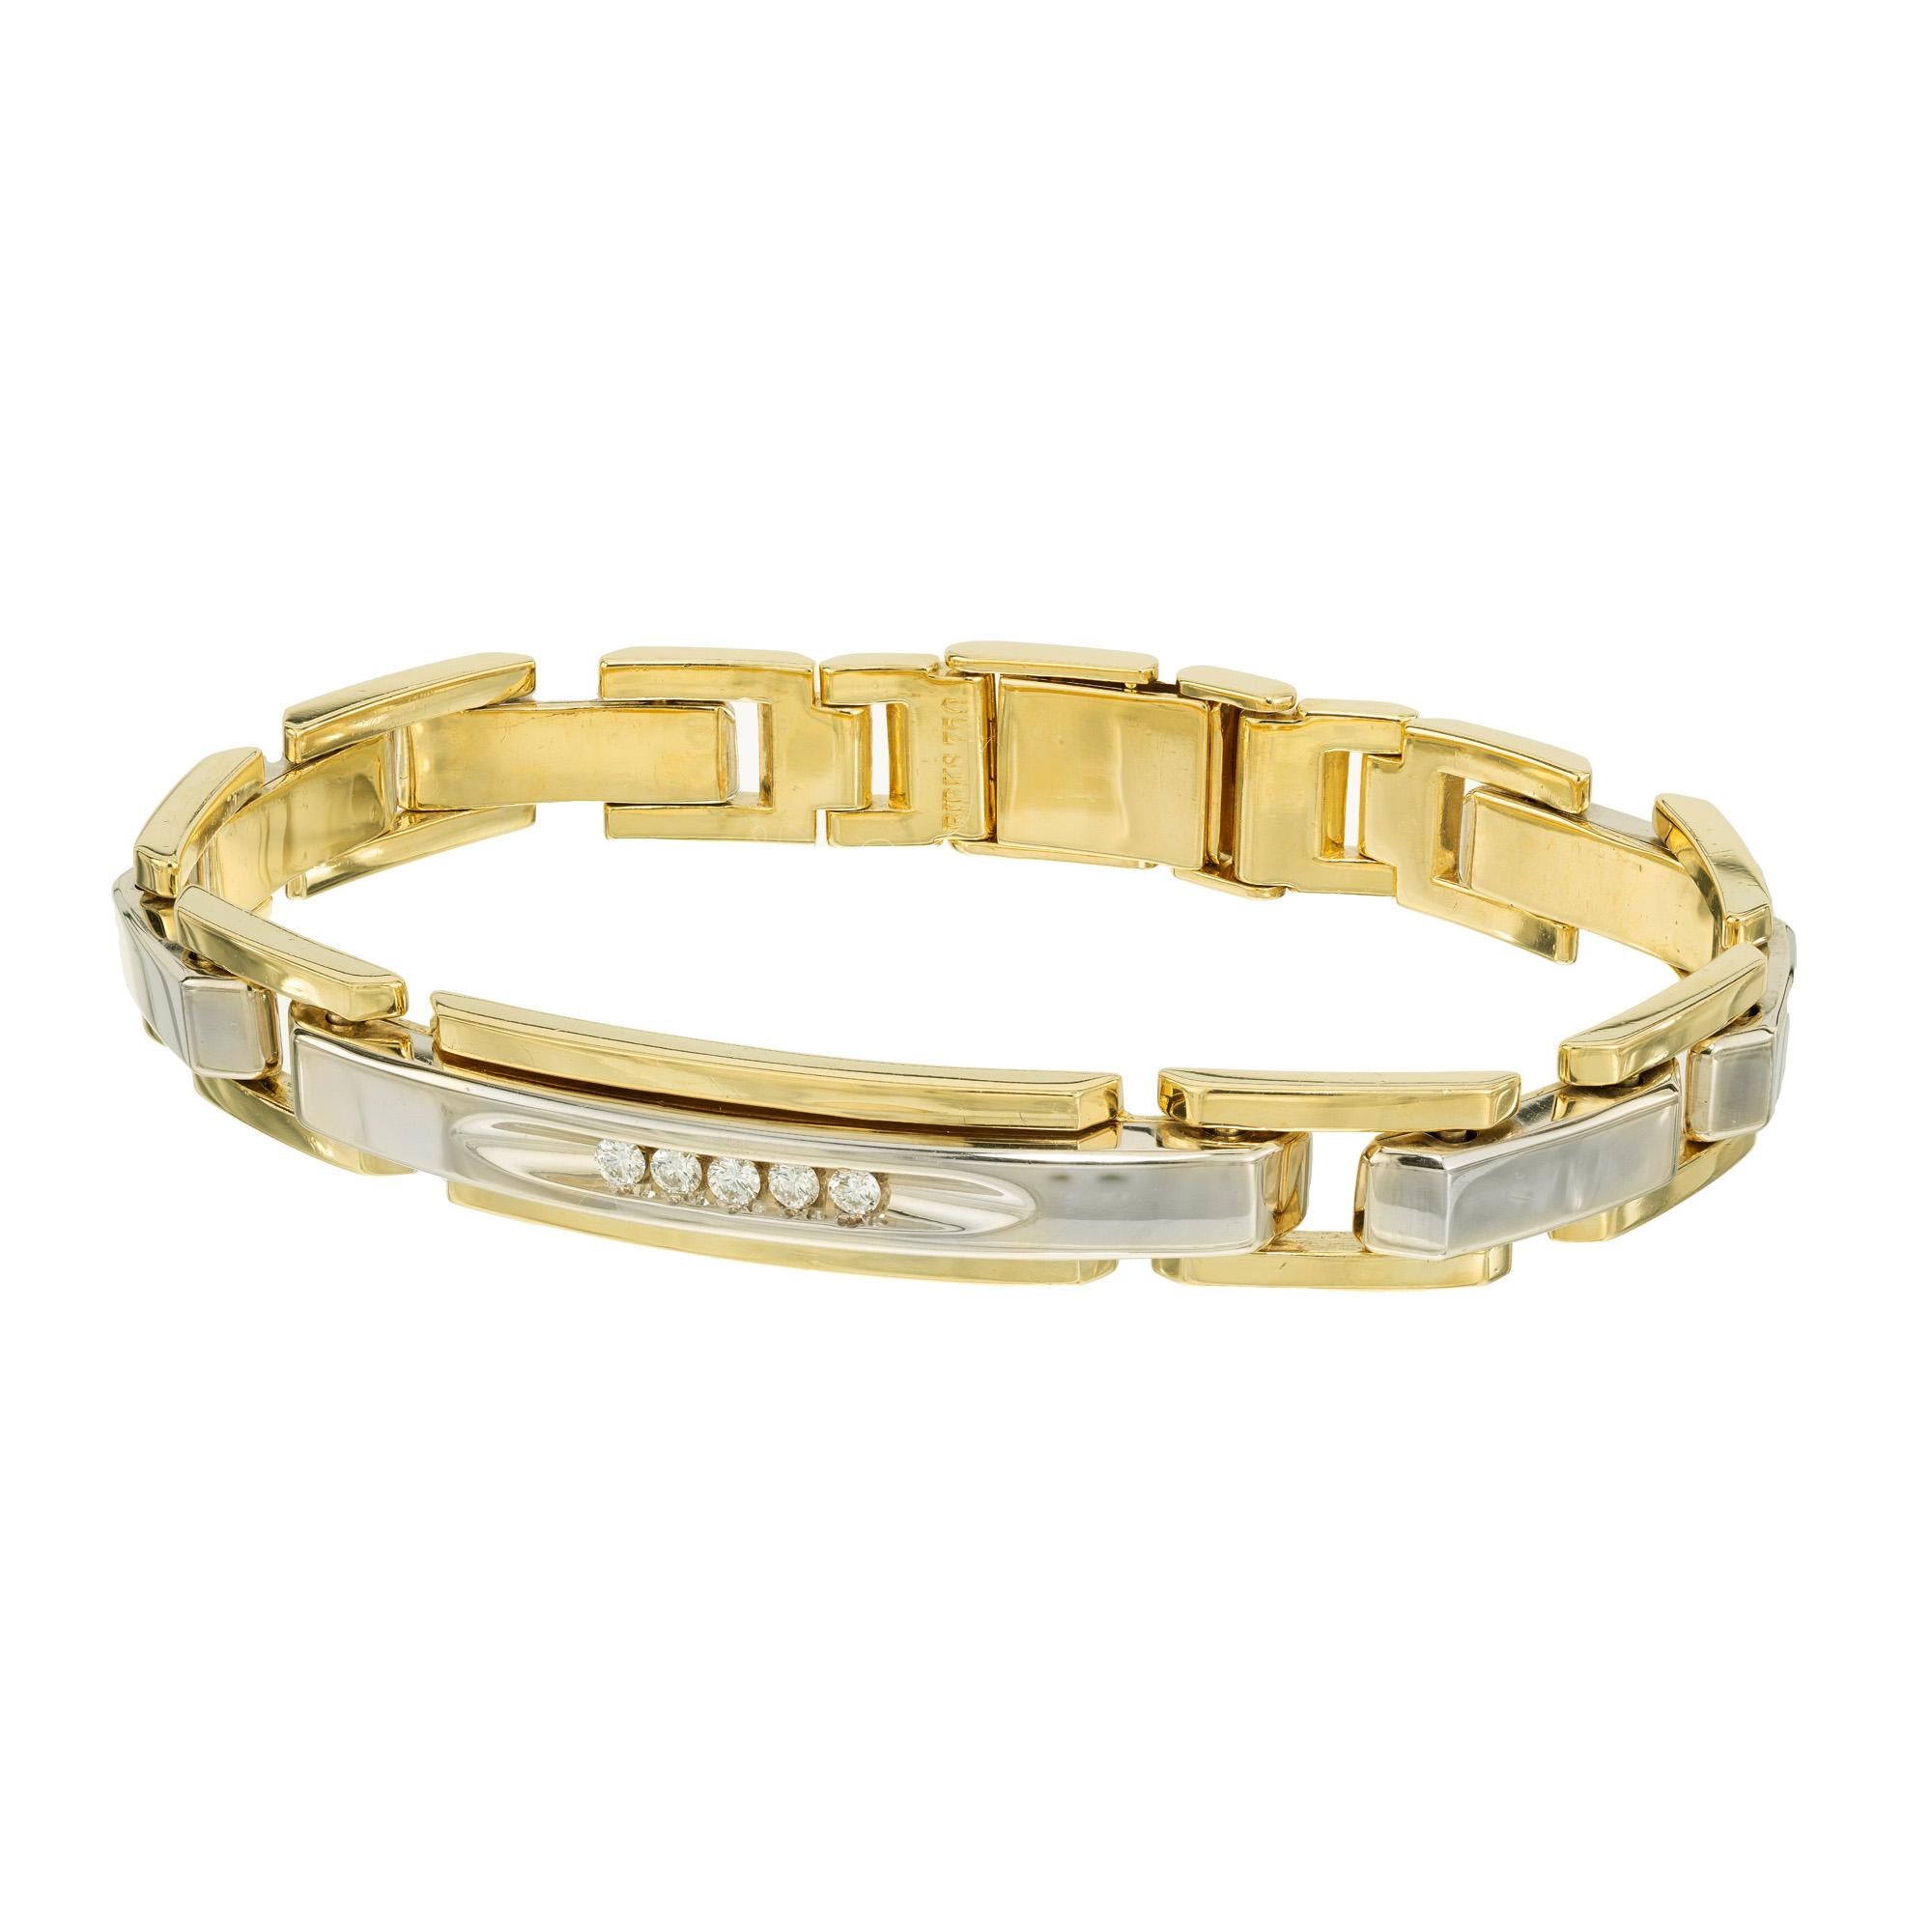 Mid Century 1960's Unique ID style diamond men's bracelet. Crafted in solid 18k yellow gold the links are connected by solid 18k white gold connectors. The bracelet is adorned with 5 round brilliant cut diamonds. It has a secure box catch. The